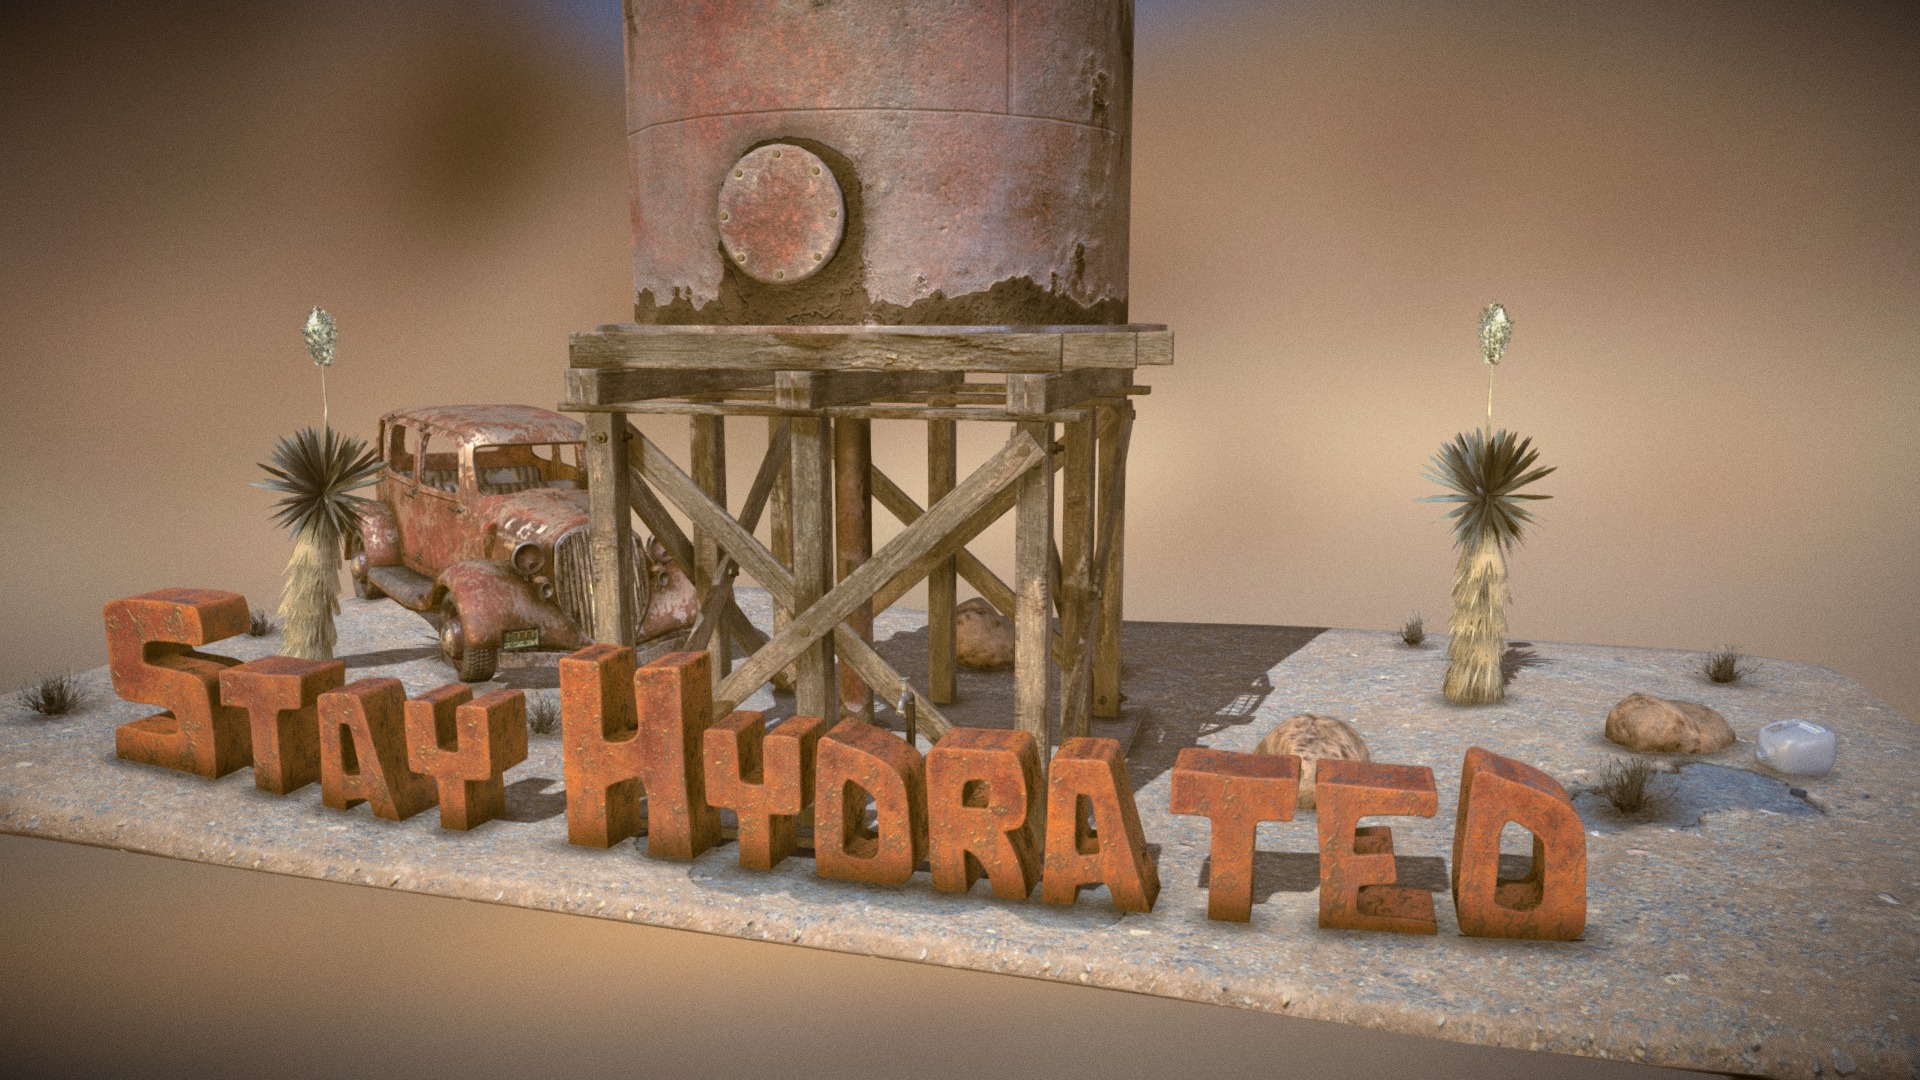 Stay Hydrated is my VR game project for Oculus Launchpad. It focuses around exploring and finding water in the desert. I made this little scene to promote it as well as try sketchfab's new clearcoat feature for the water and on the car! Modeled in Blender, textured in Substance Painter 3d model